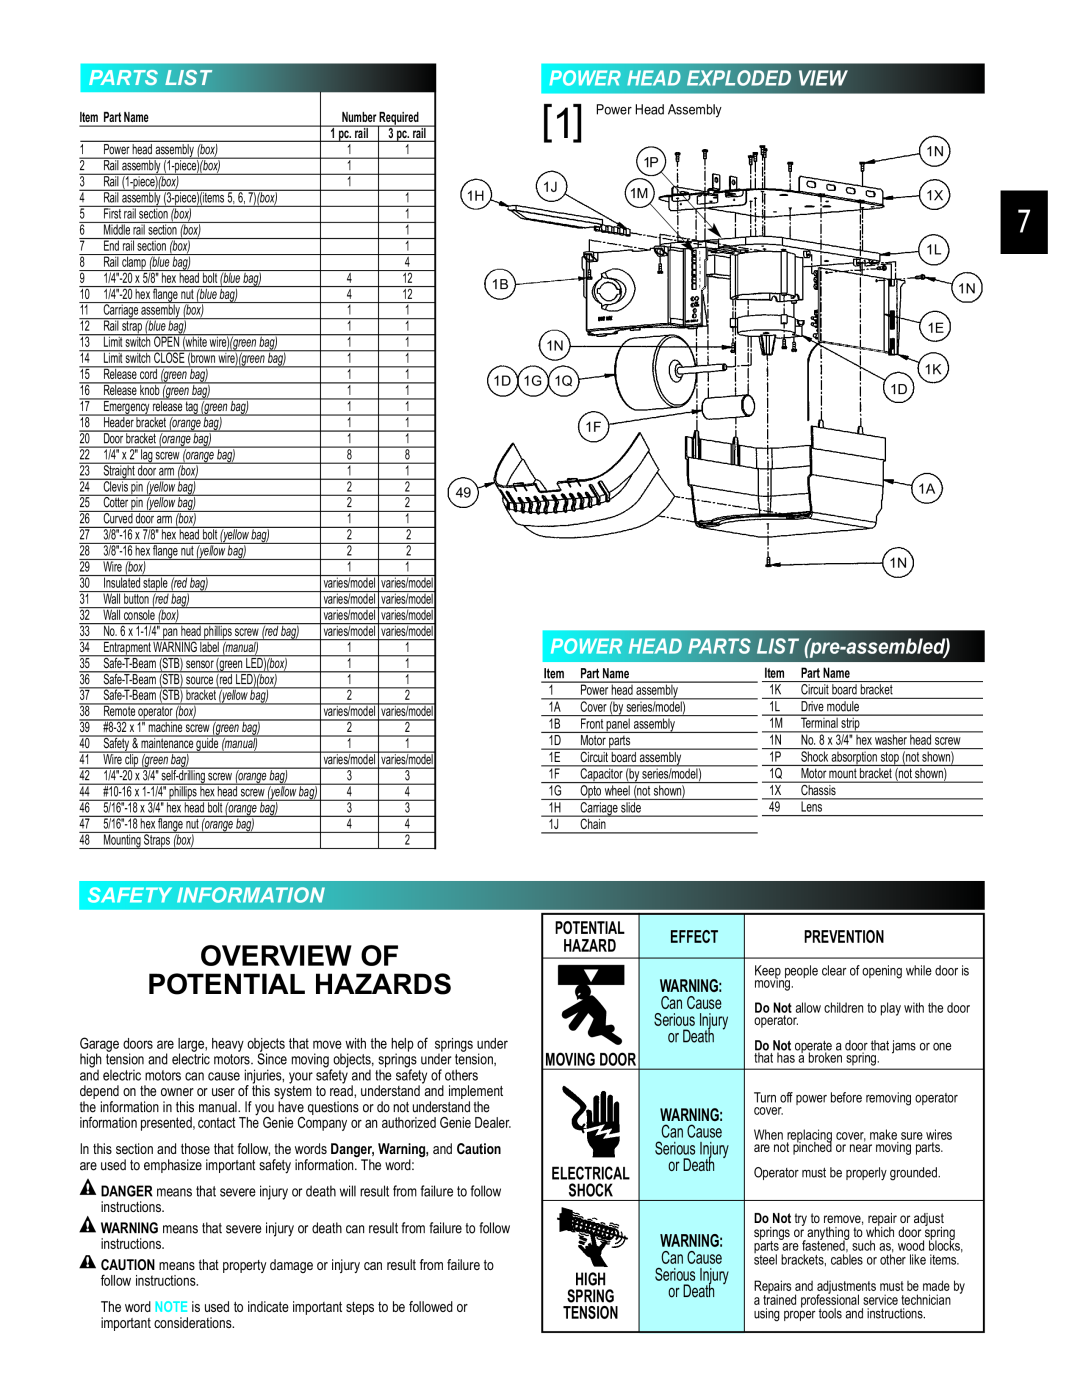 Genie 3452535556 Parts List, Power Head Exploded View, POWER HEAD PARTS LIST pre-assembled, Safety Information, Effect 